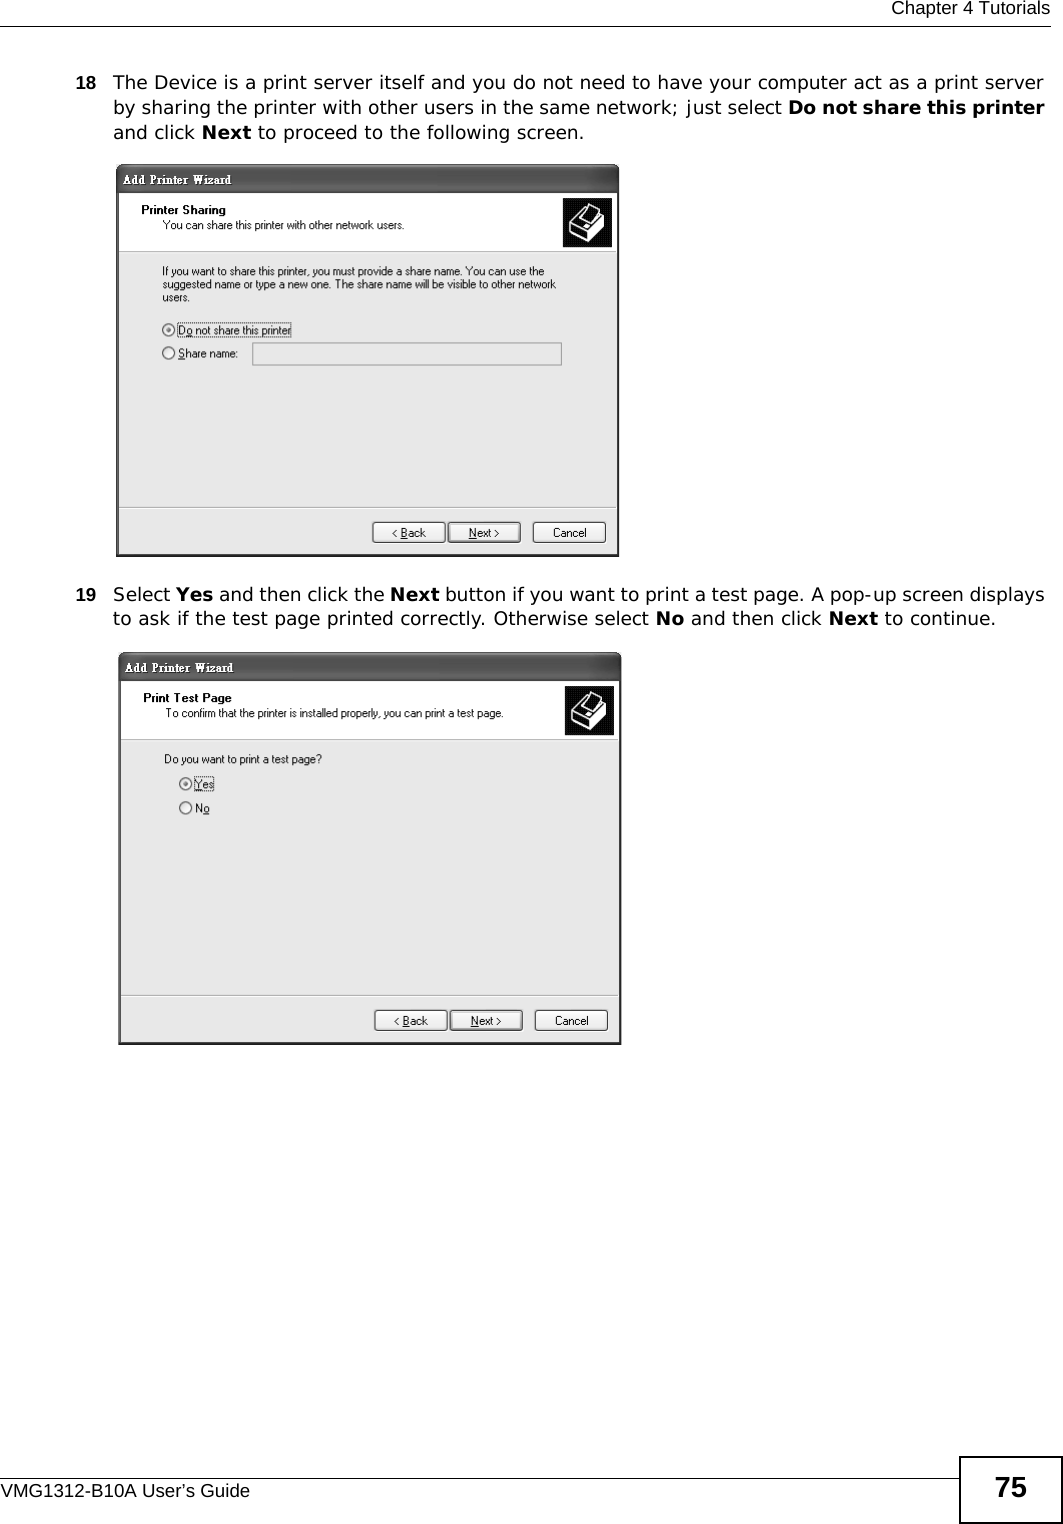  Chapter 4 TutorialsVMG1312-B10A User’s Guide 7518 The Device is a print server itself and you do not need to have your computer act as a print server by sharing the printer with other users in the same network; just select Do not share this printer and click Next to proceed to the following screen. Tutorial: Add Printer Wizard: Printer Sharing 19 Select Yes and then click the Next button if you want to print a test page. A pop-up screen displays to ask if the test page printed correctly. Otherwise select No and then click Next to continue.Tutorial: Add Printer Wizard: Print Test Page 